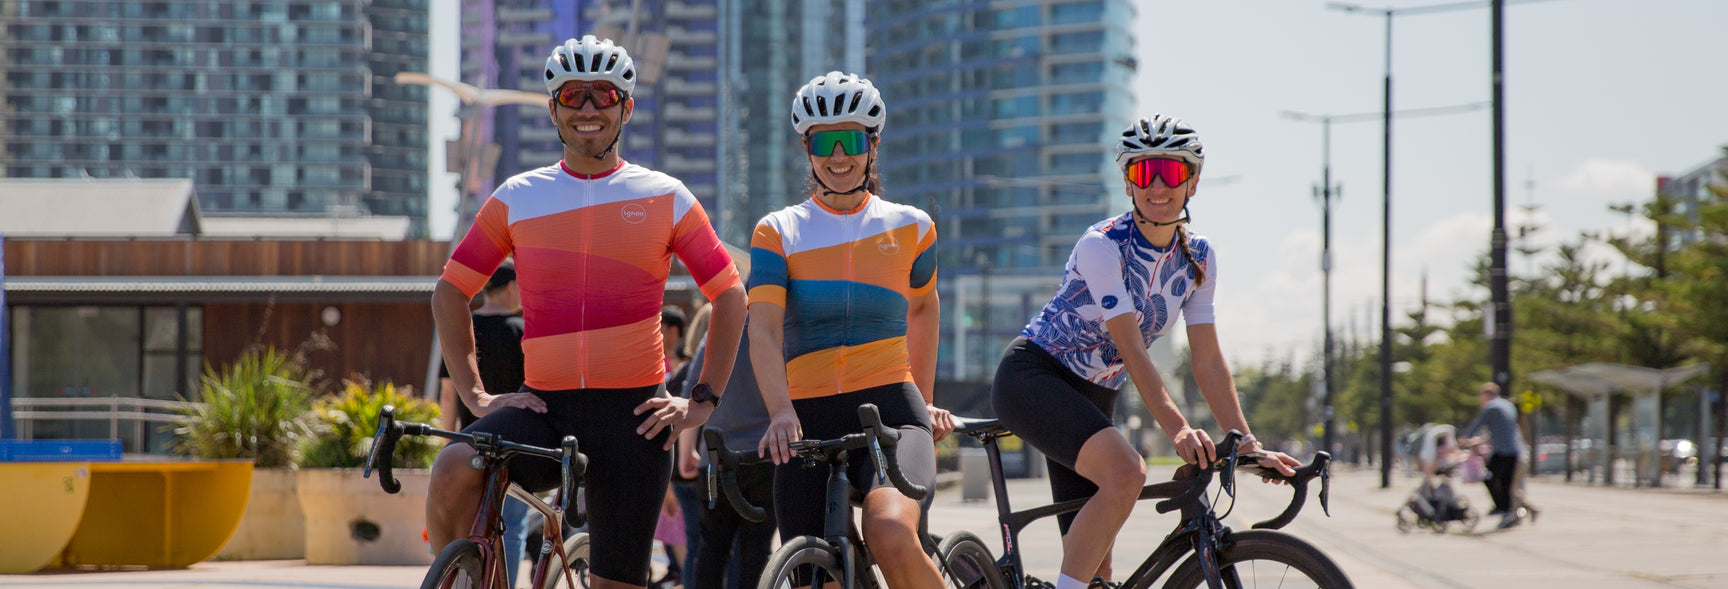 Performance, Fashion, and Comfort in Bicycling Clothes and Jerseys.